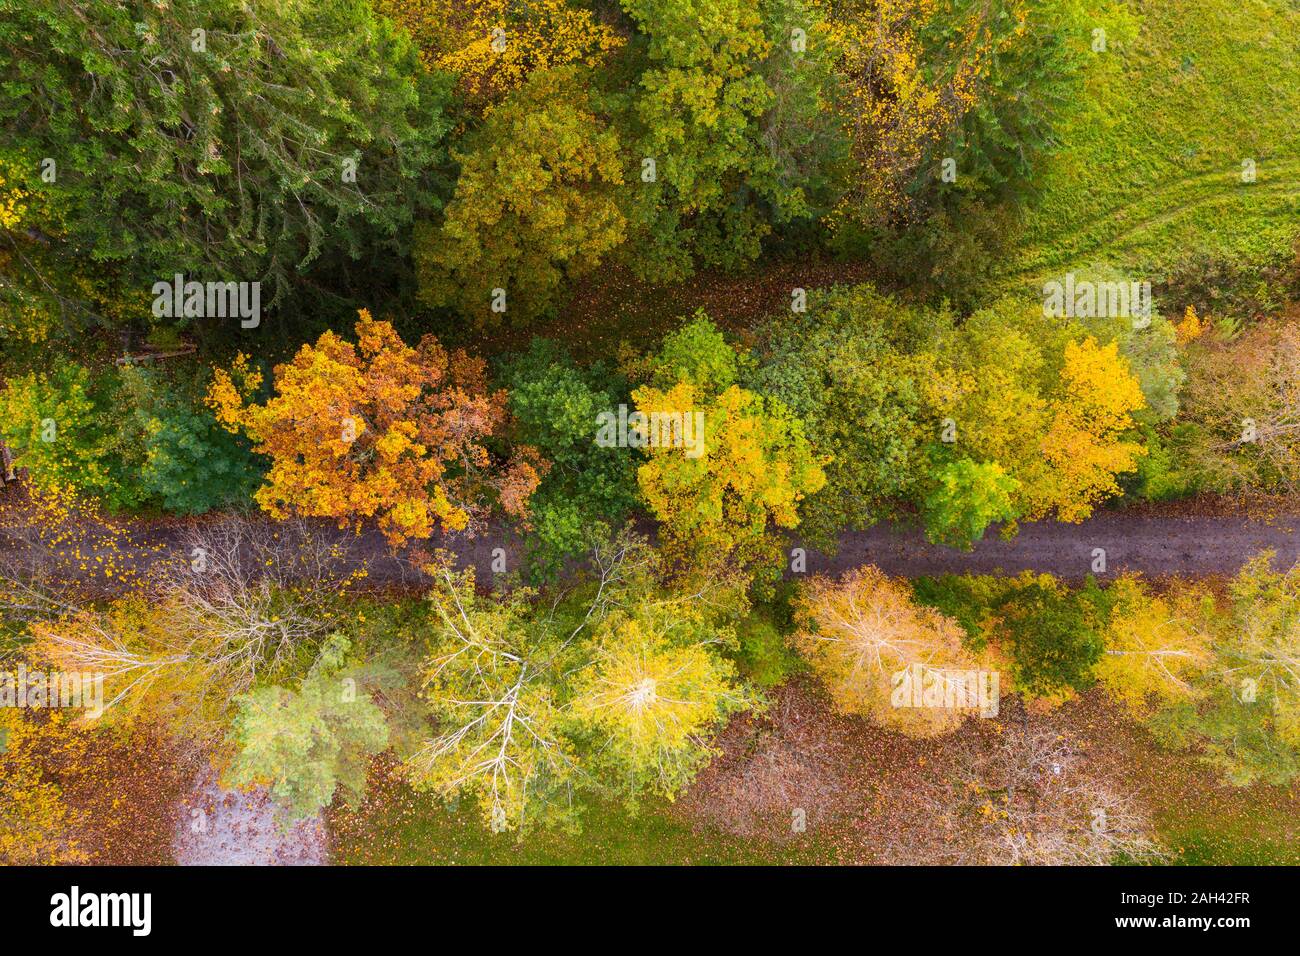 Germany, Bavaria, Upper Bavaria, Toelzer Land, Konigsdorf, Aerial view of Autumn forest and footpath Stock Photo